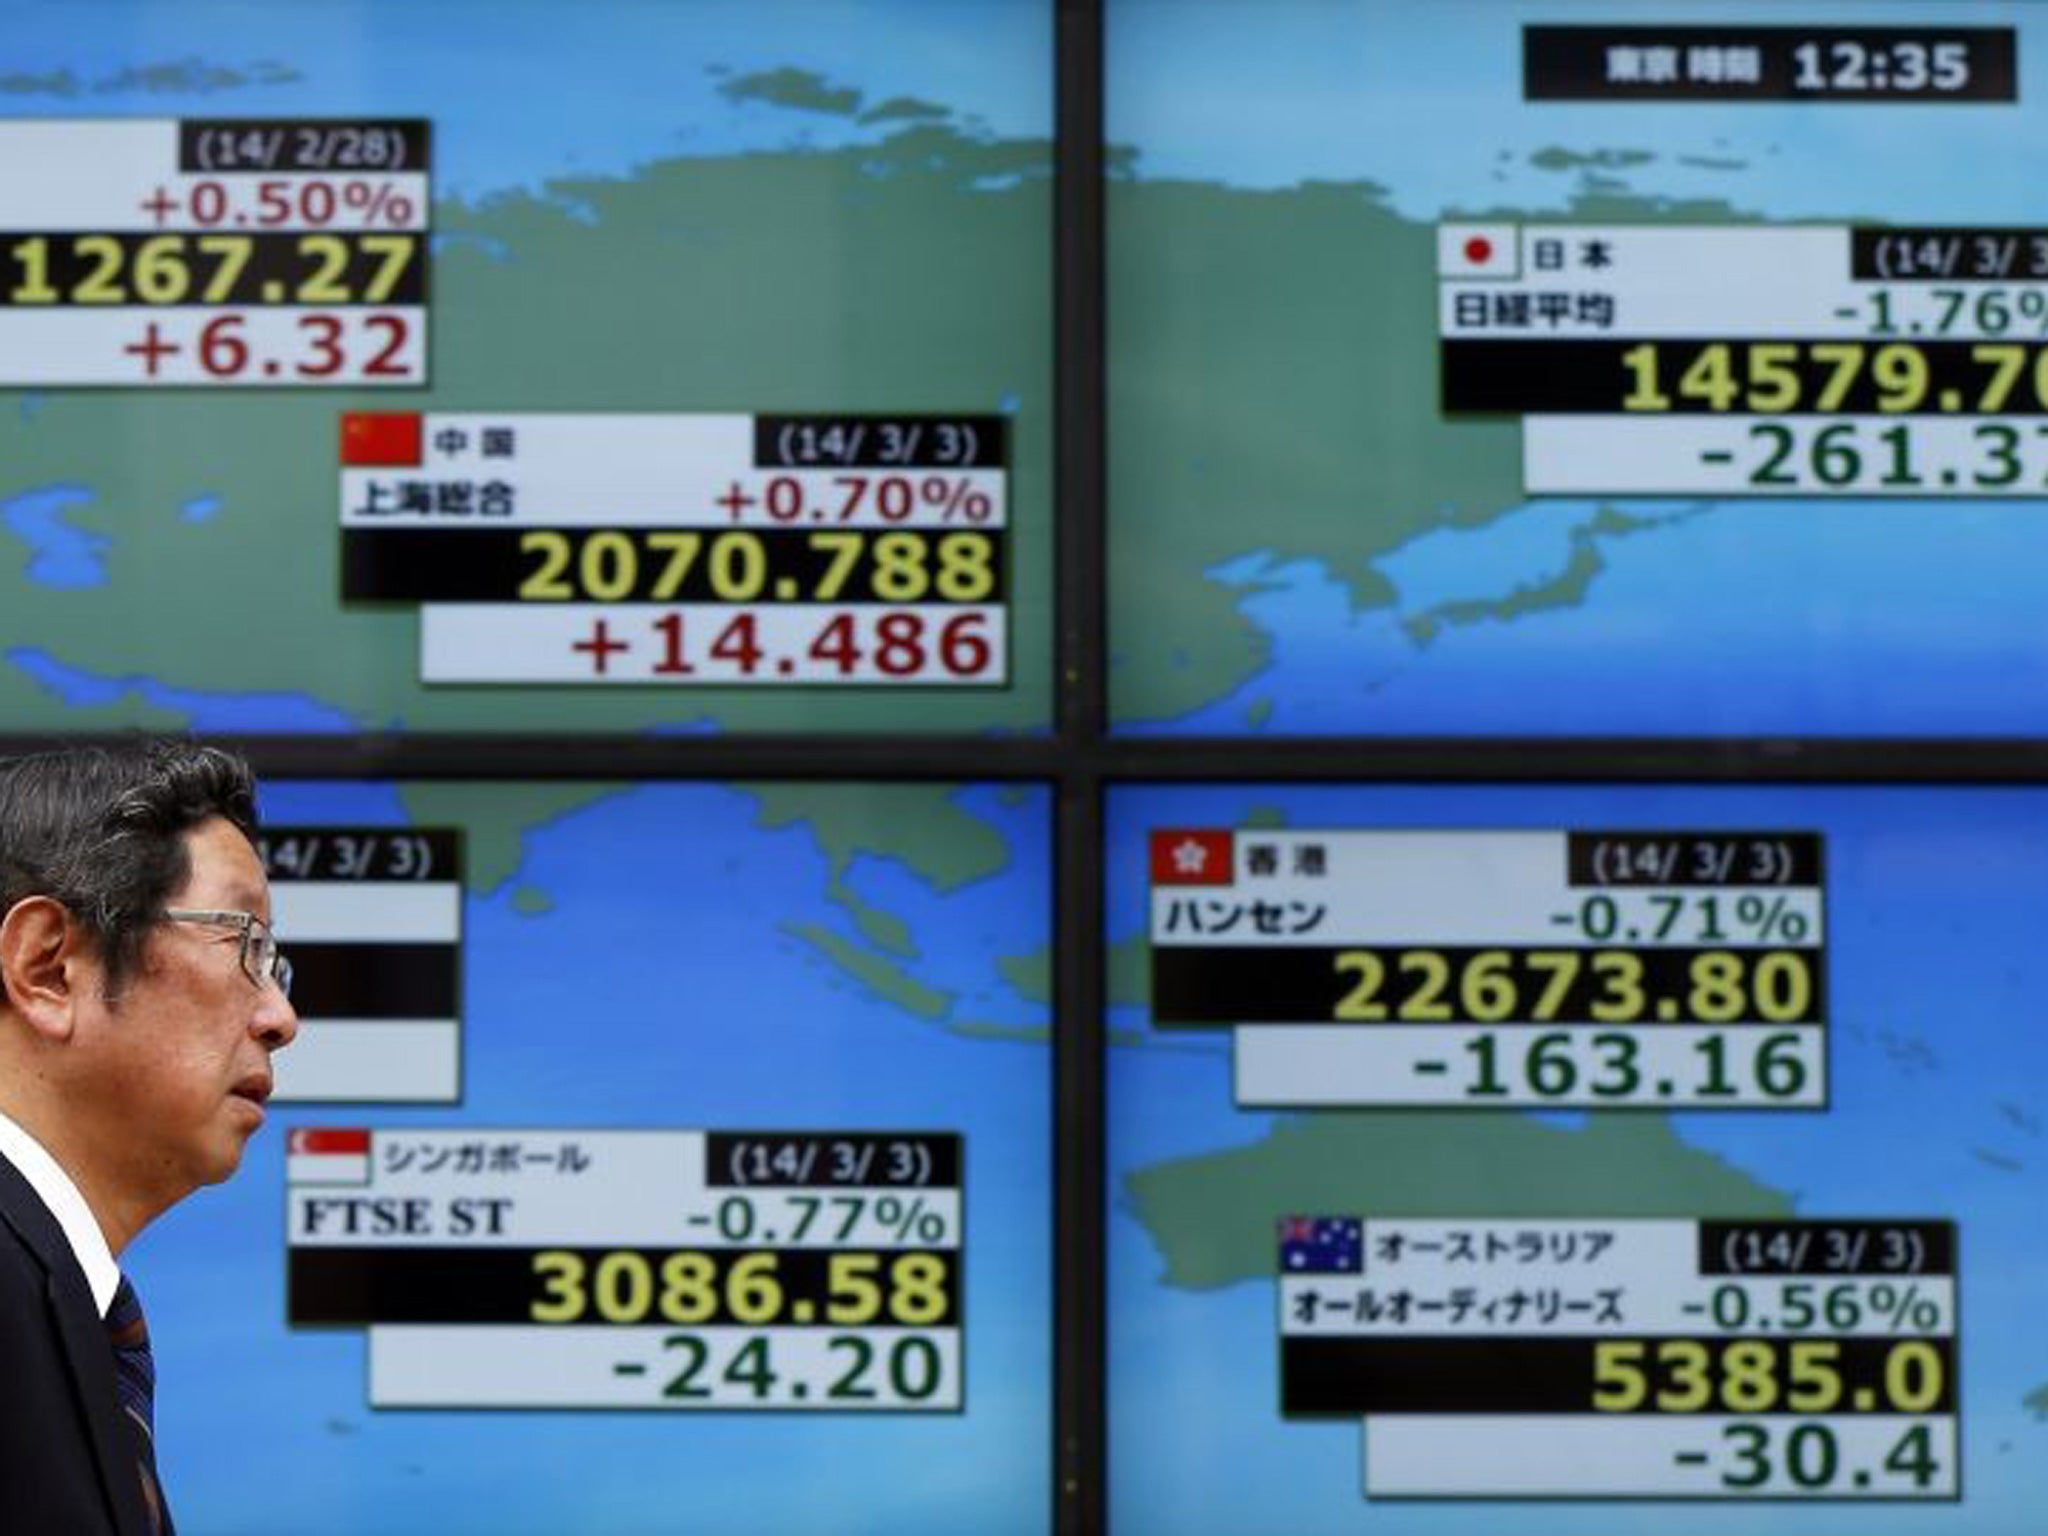 An electronic board displays stock market indices outside a brokerage in Tokyo on 3 March 3, 2014 as escalating tensions in Ukraine sparked risk aversion